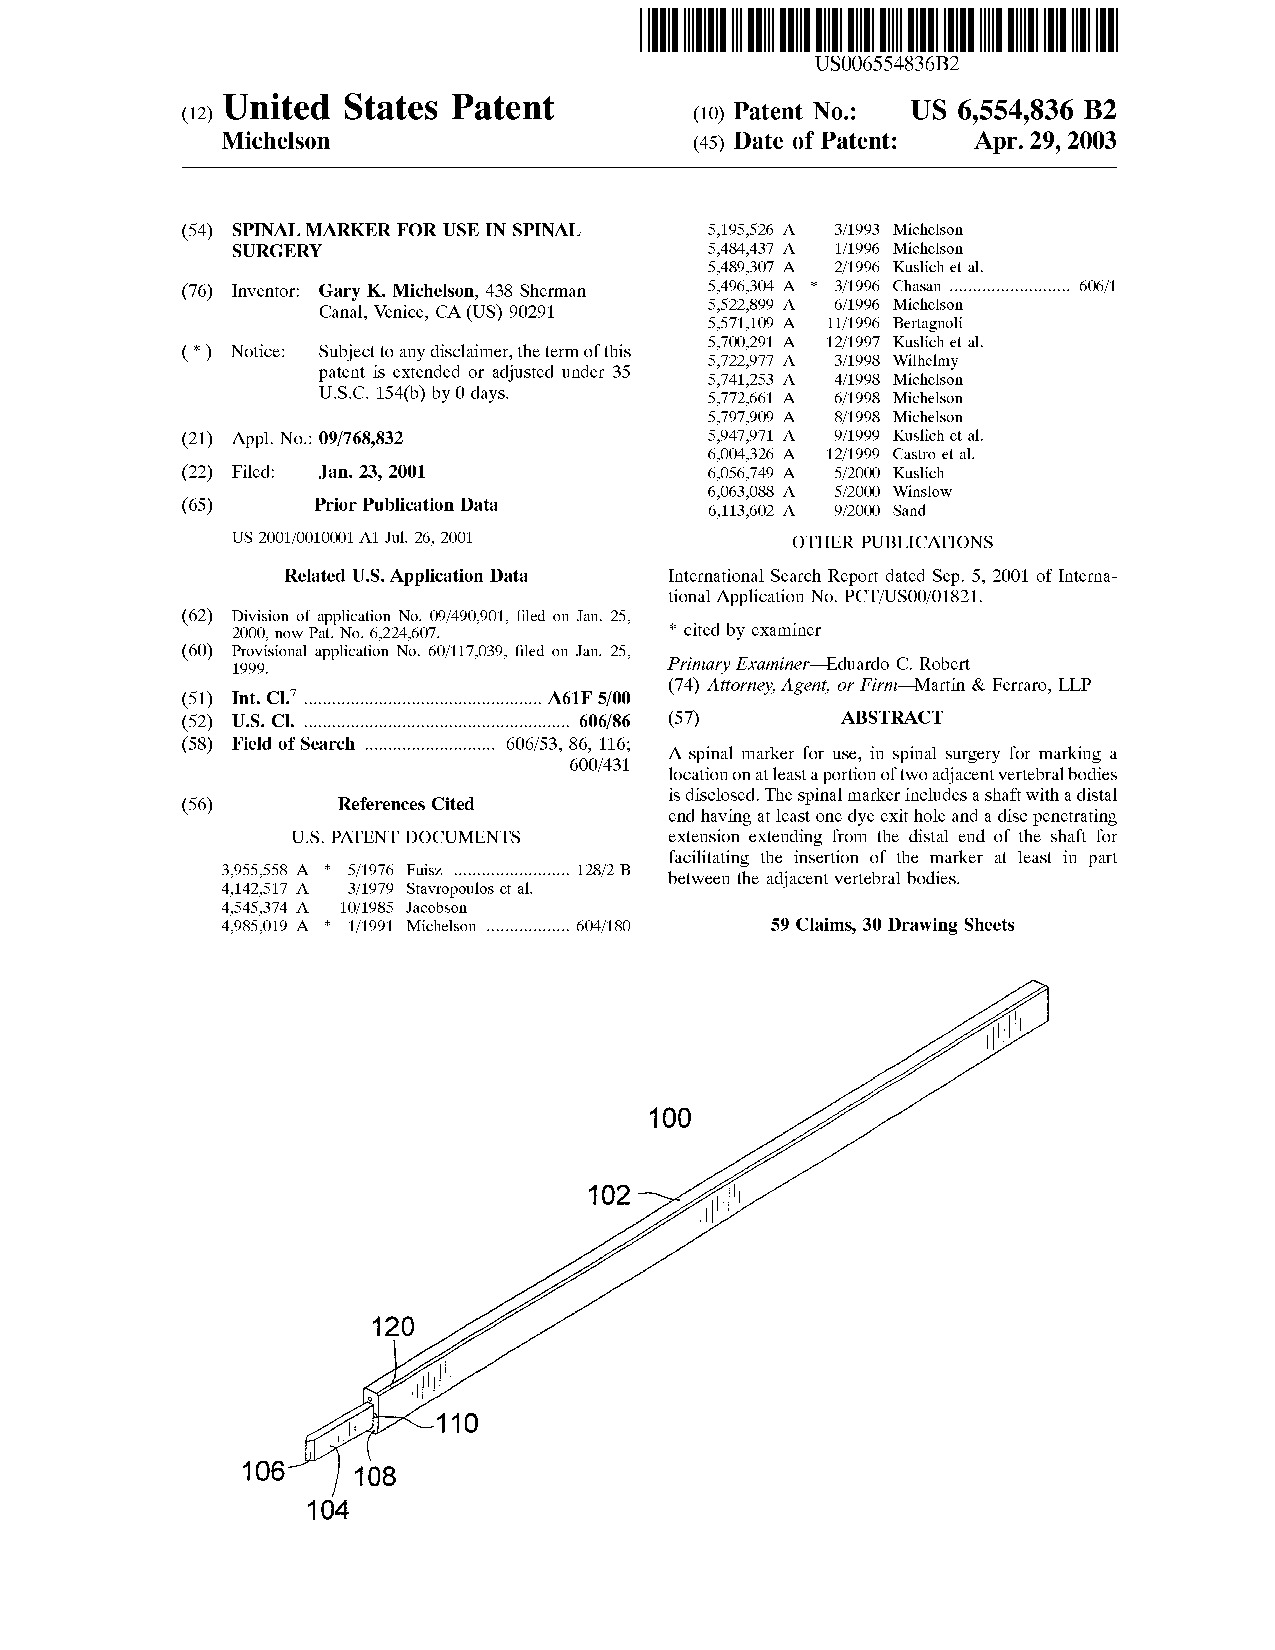 Spinal marker for use in spinal surgery - Patent 6,554,836